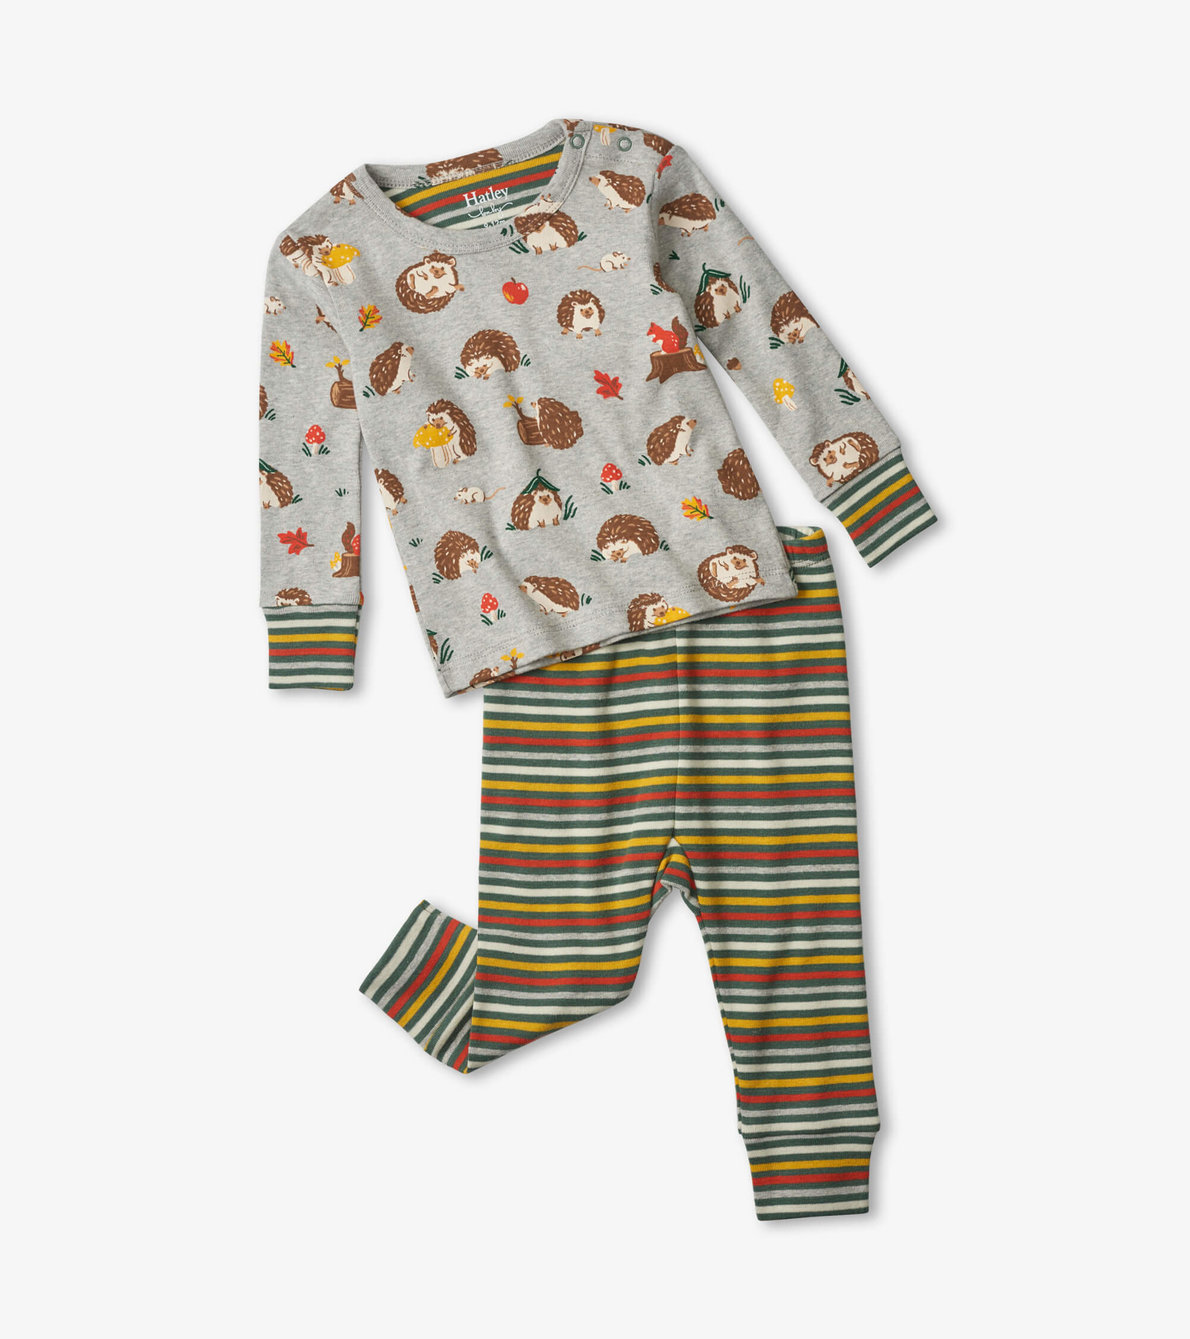 View larger image of Forest Creatures Organic Cotton Baby Pajama Set